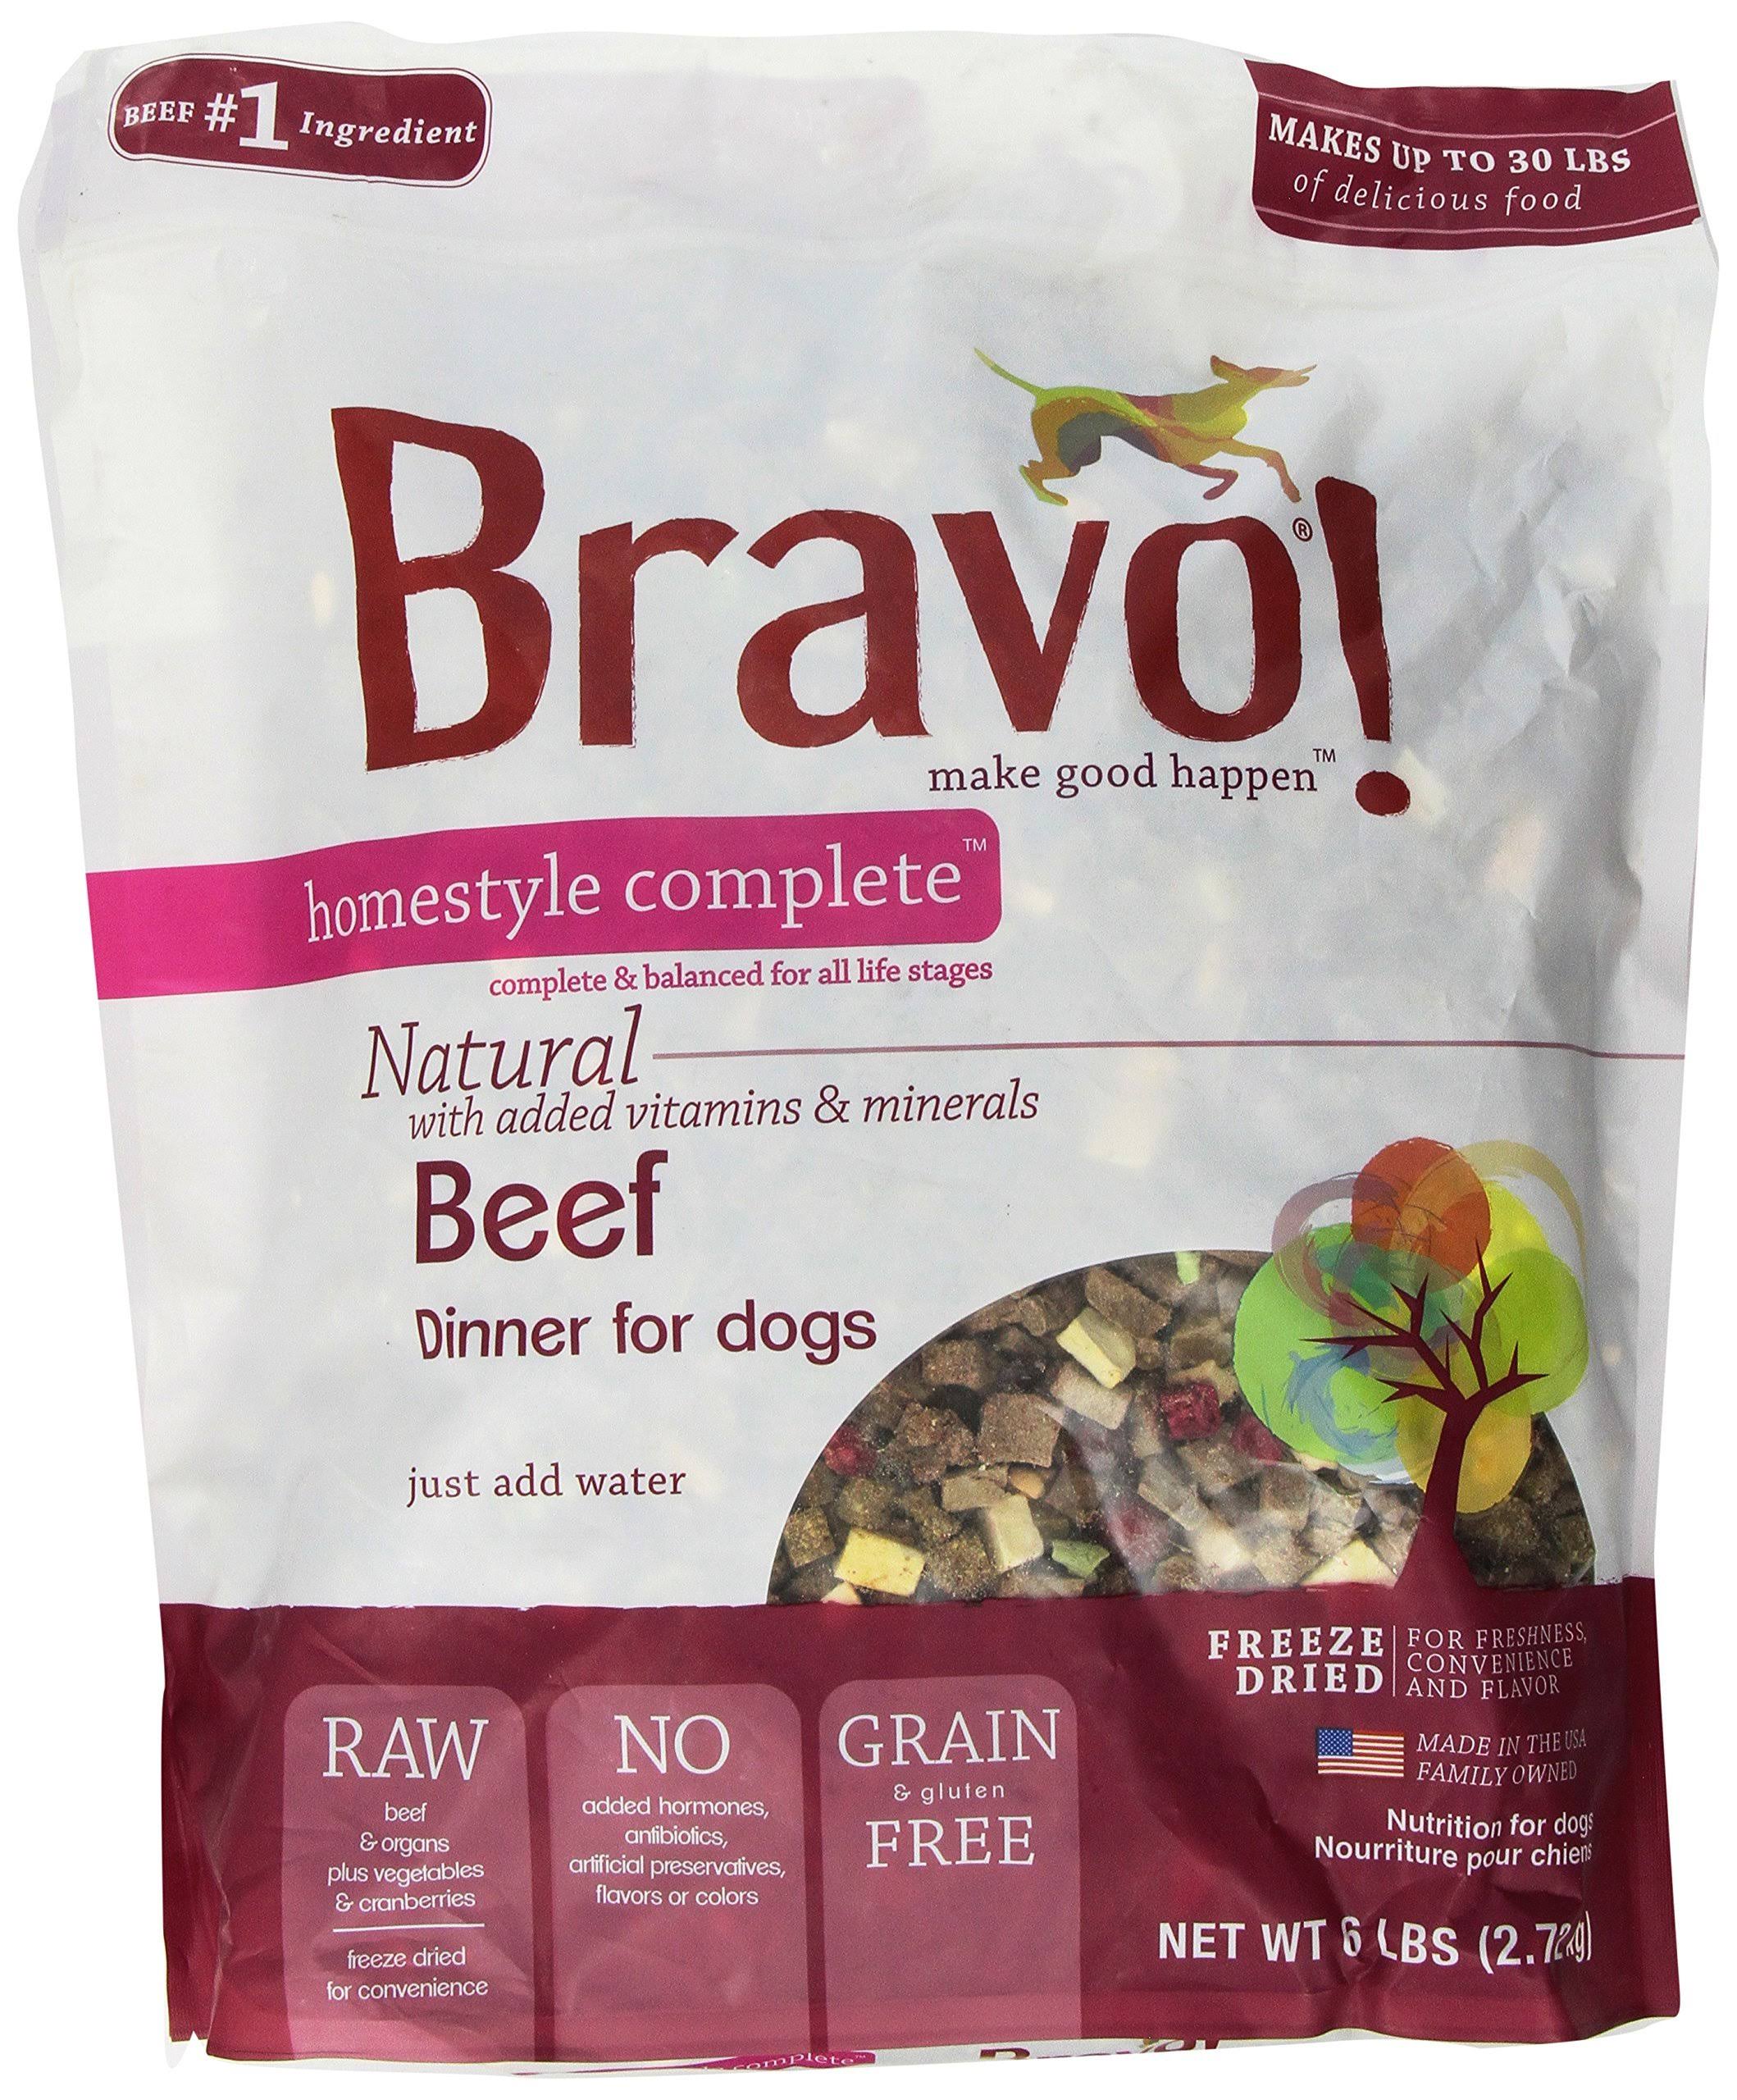 Bravo Homestyle Complete Freeze Dried Dog Food - Beef Dinner, 6lbs